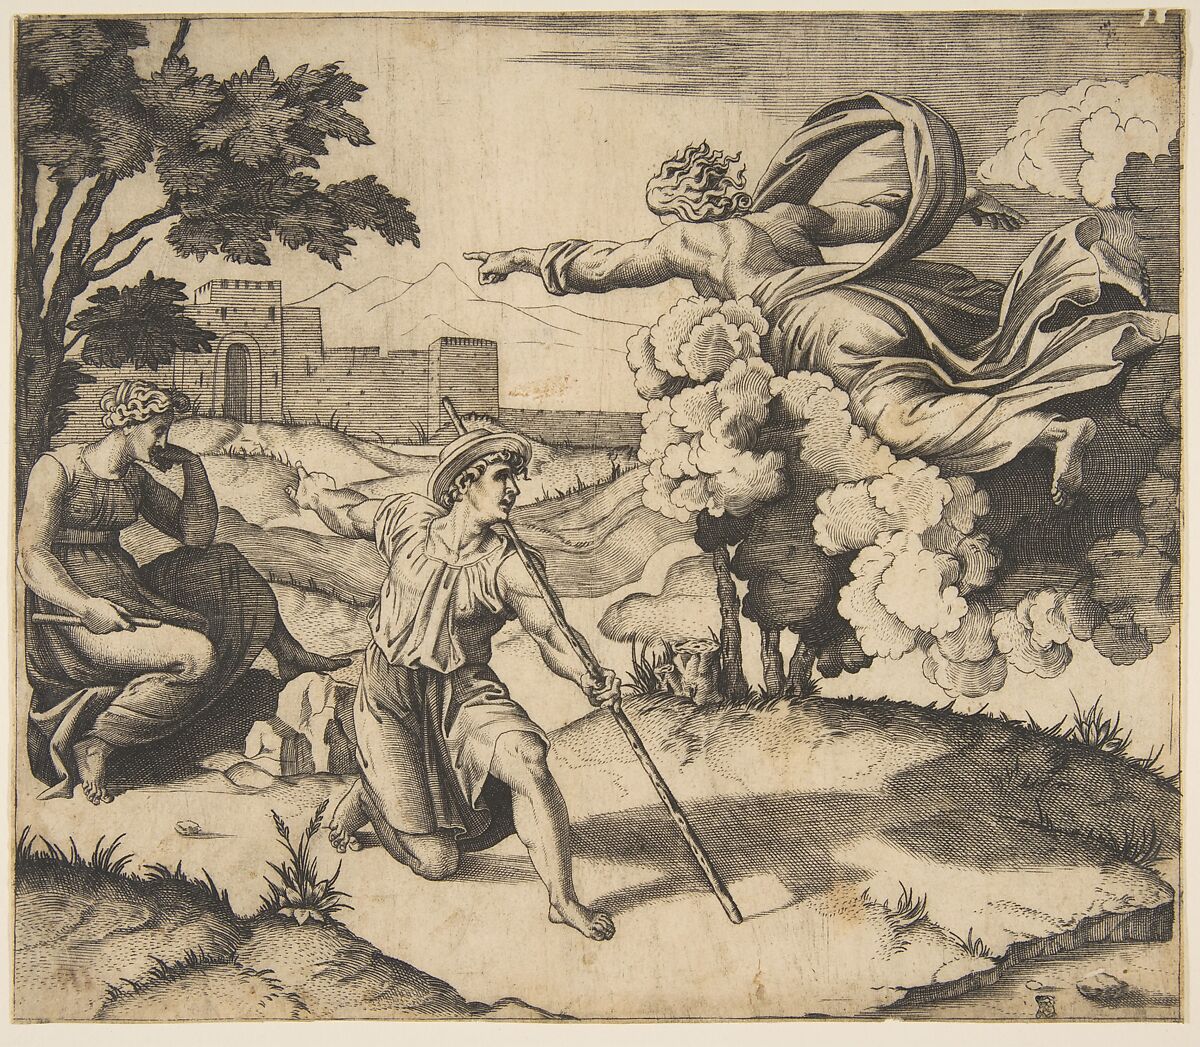 God appearing to Isaac; God floating in clouds pointing toward Rebecca seated under a tree at left, Isaac kneeling in the center holding a large stick and also pointing to Rebecca, Marco Dente (Italian, Ravenna, active by 1515–died 1527 Rome), Engraving 